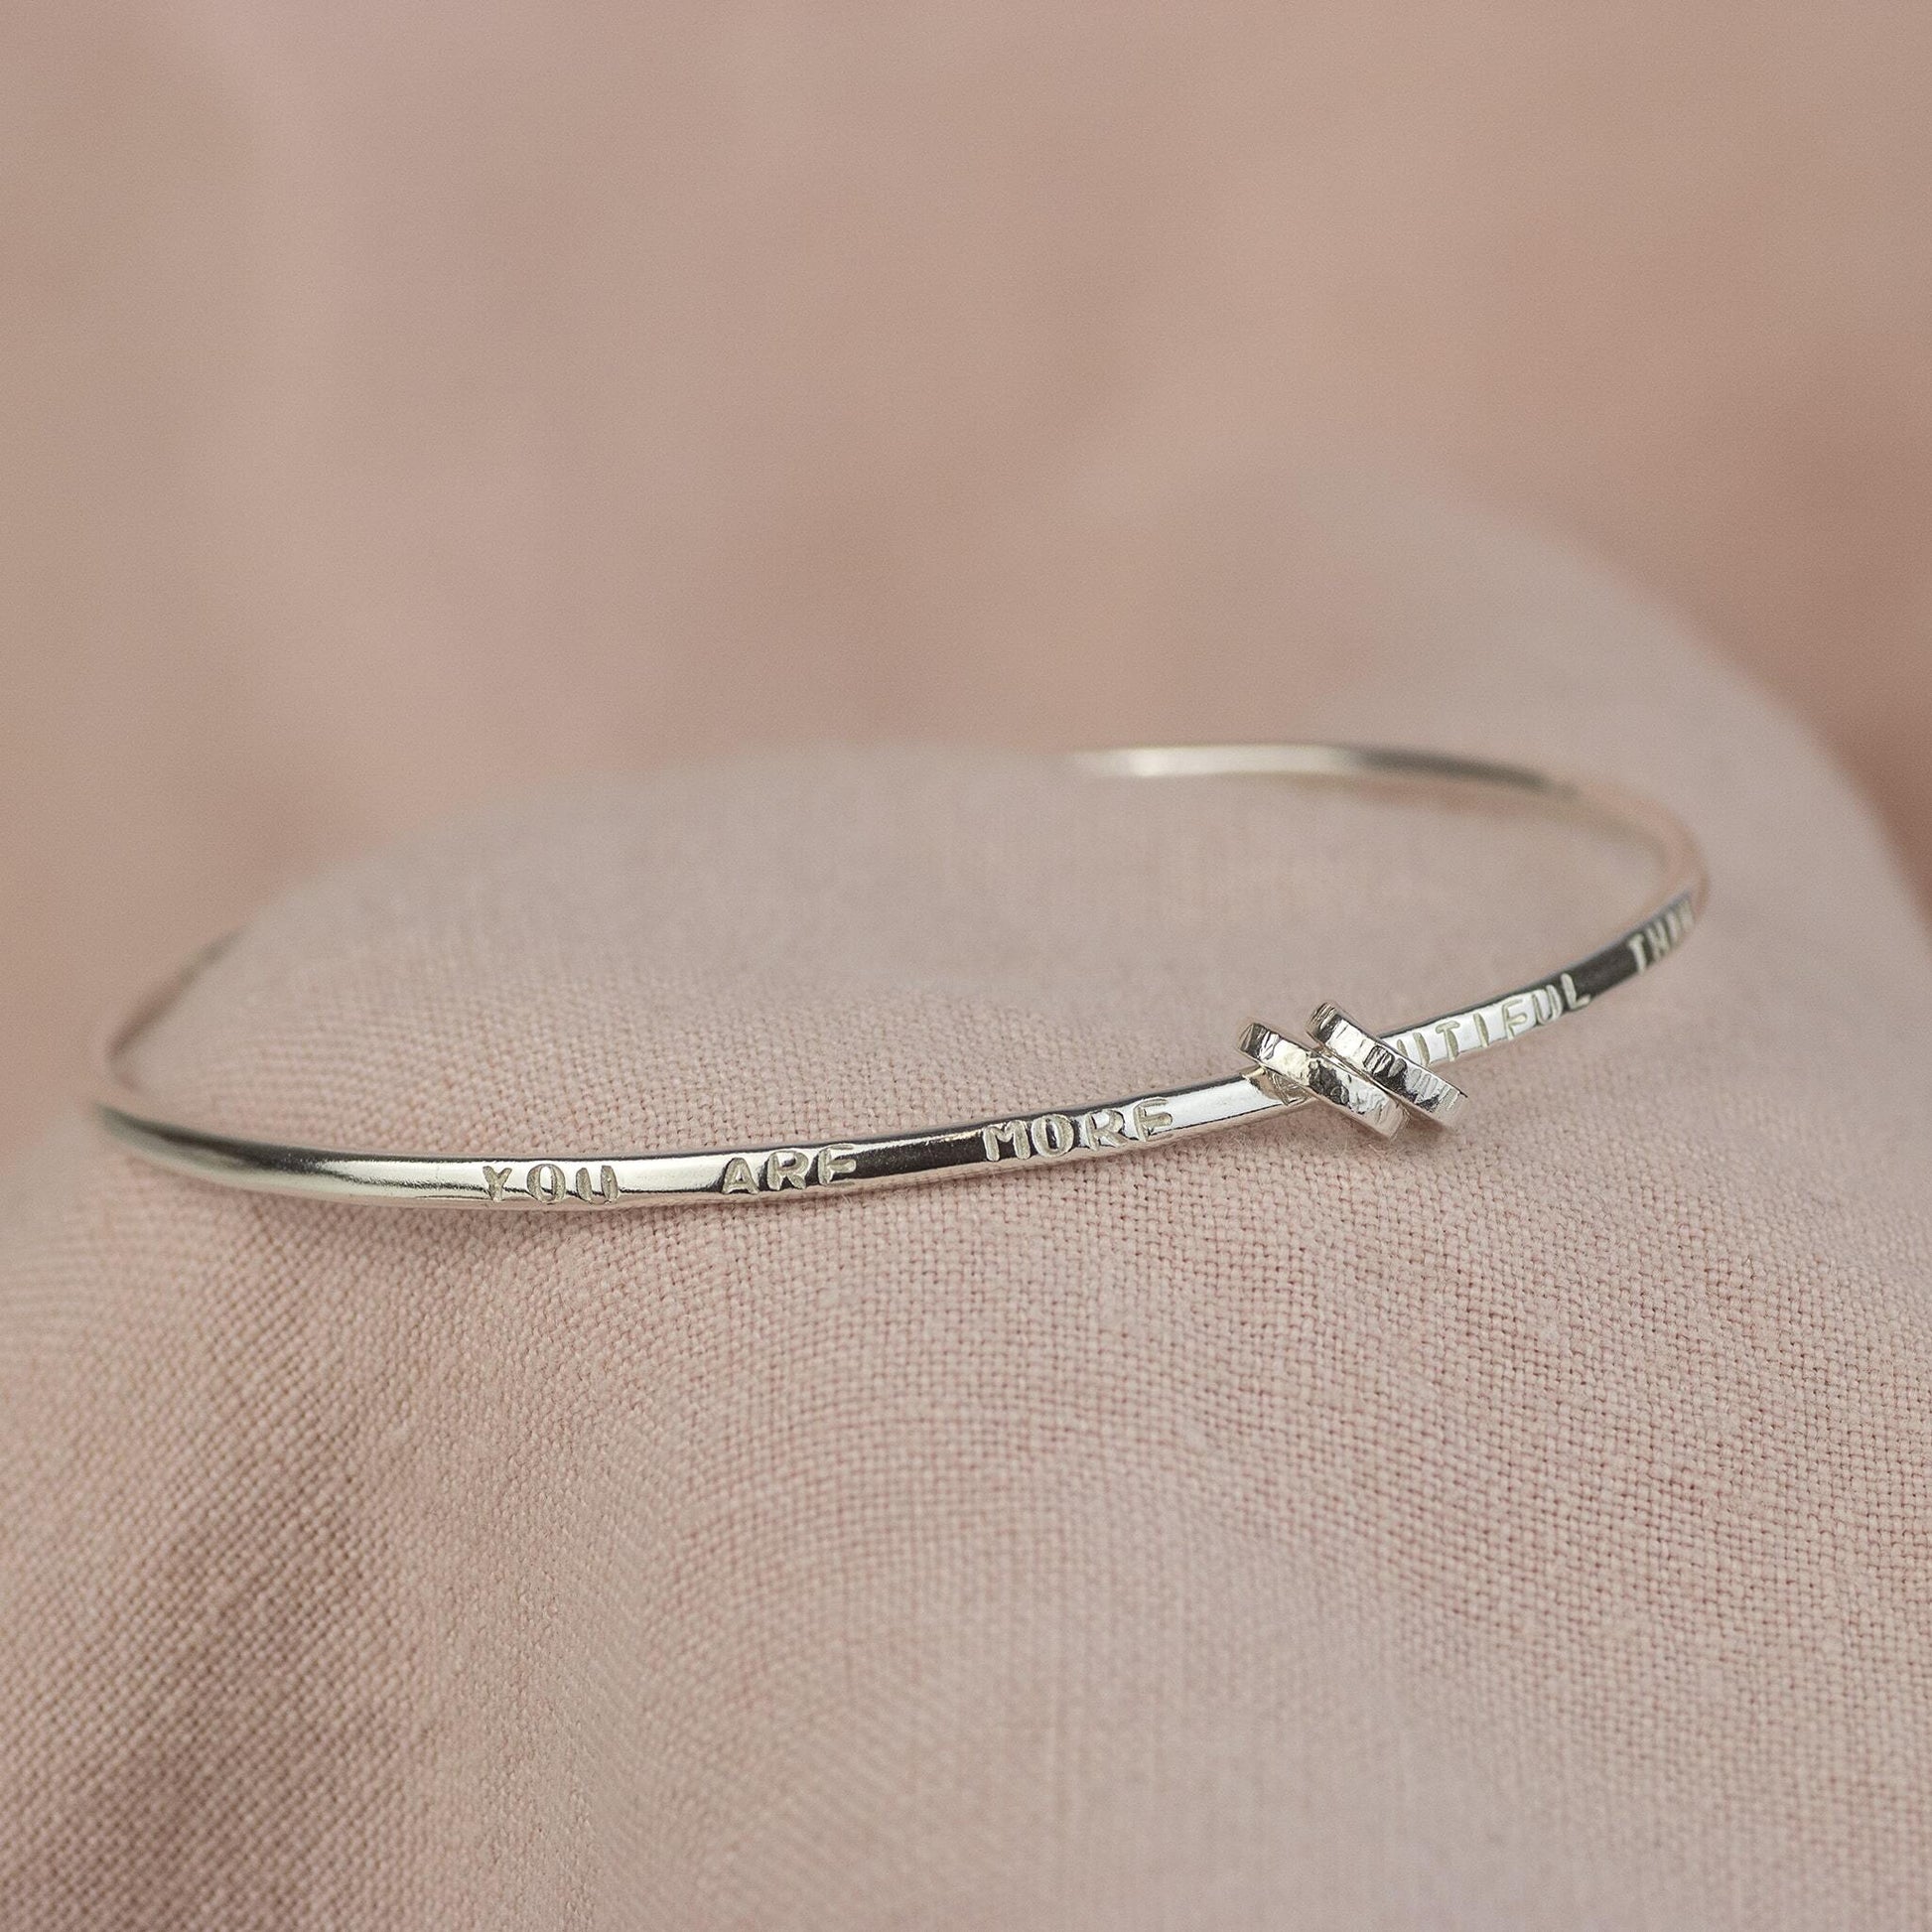 2nd Anniversary Gift - Personalised Silver Bangle - 2 Rings for 2 Years